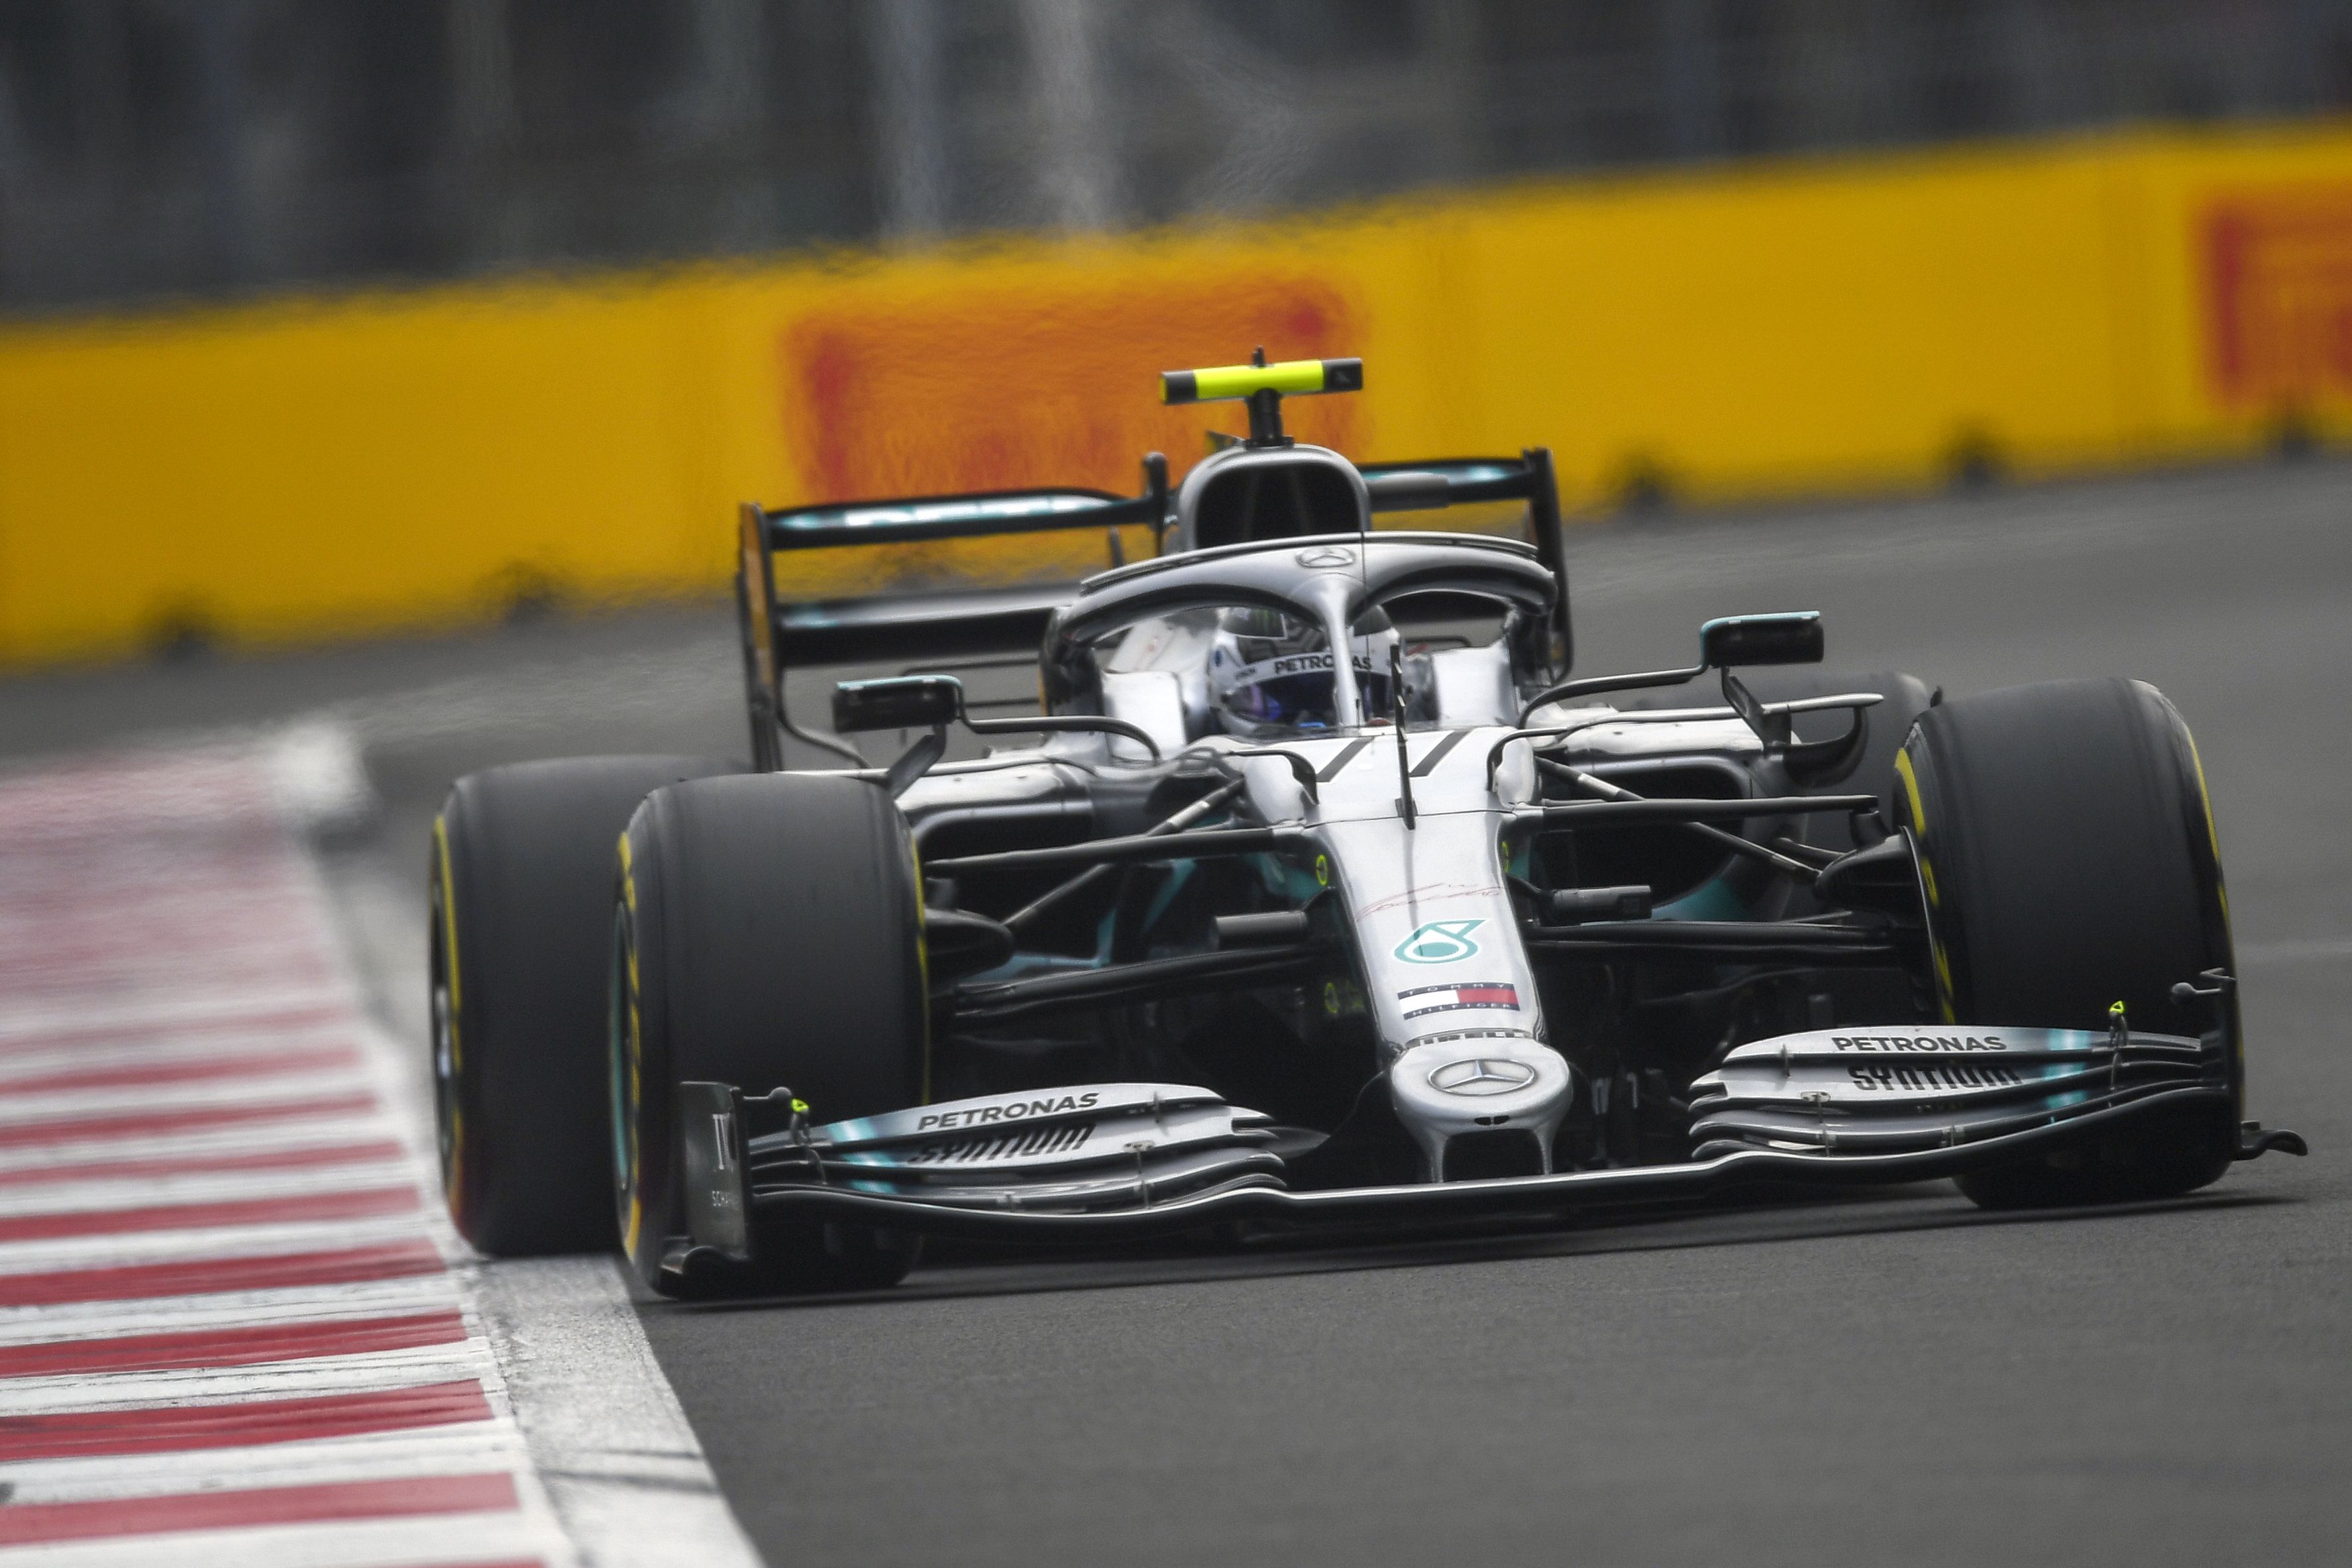 Mercedes Benz's Finnish driver Valtteri Bottas powers his car during the quallifying session of the Mexican Grand Prix at the Hermanos Rodriguez circuit in Mexico City on October 26, 2019. (Photo by PEDRO PARDO / AFP)